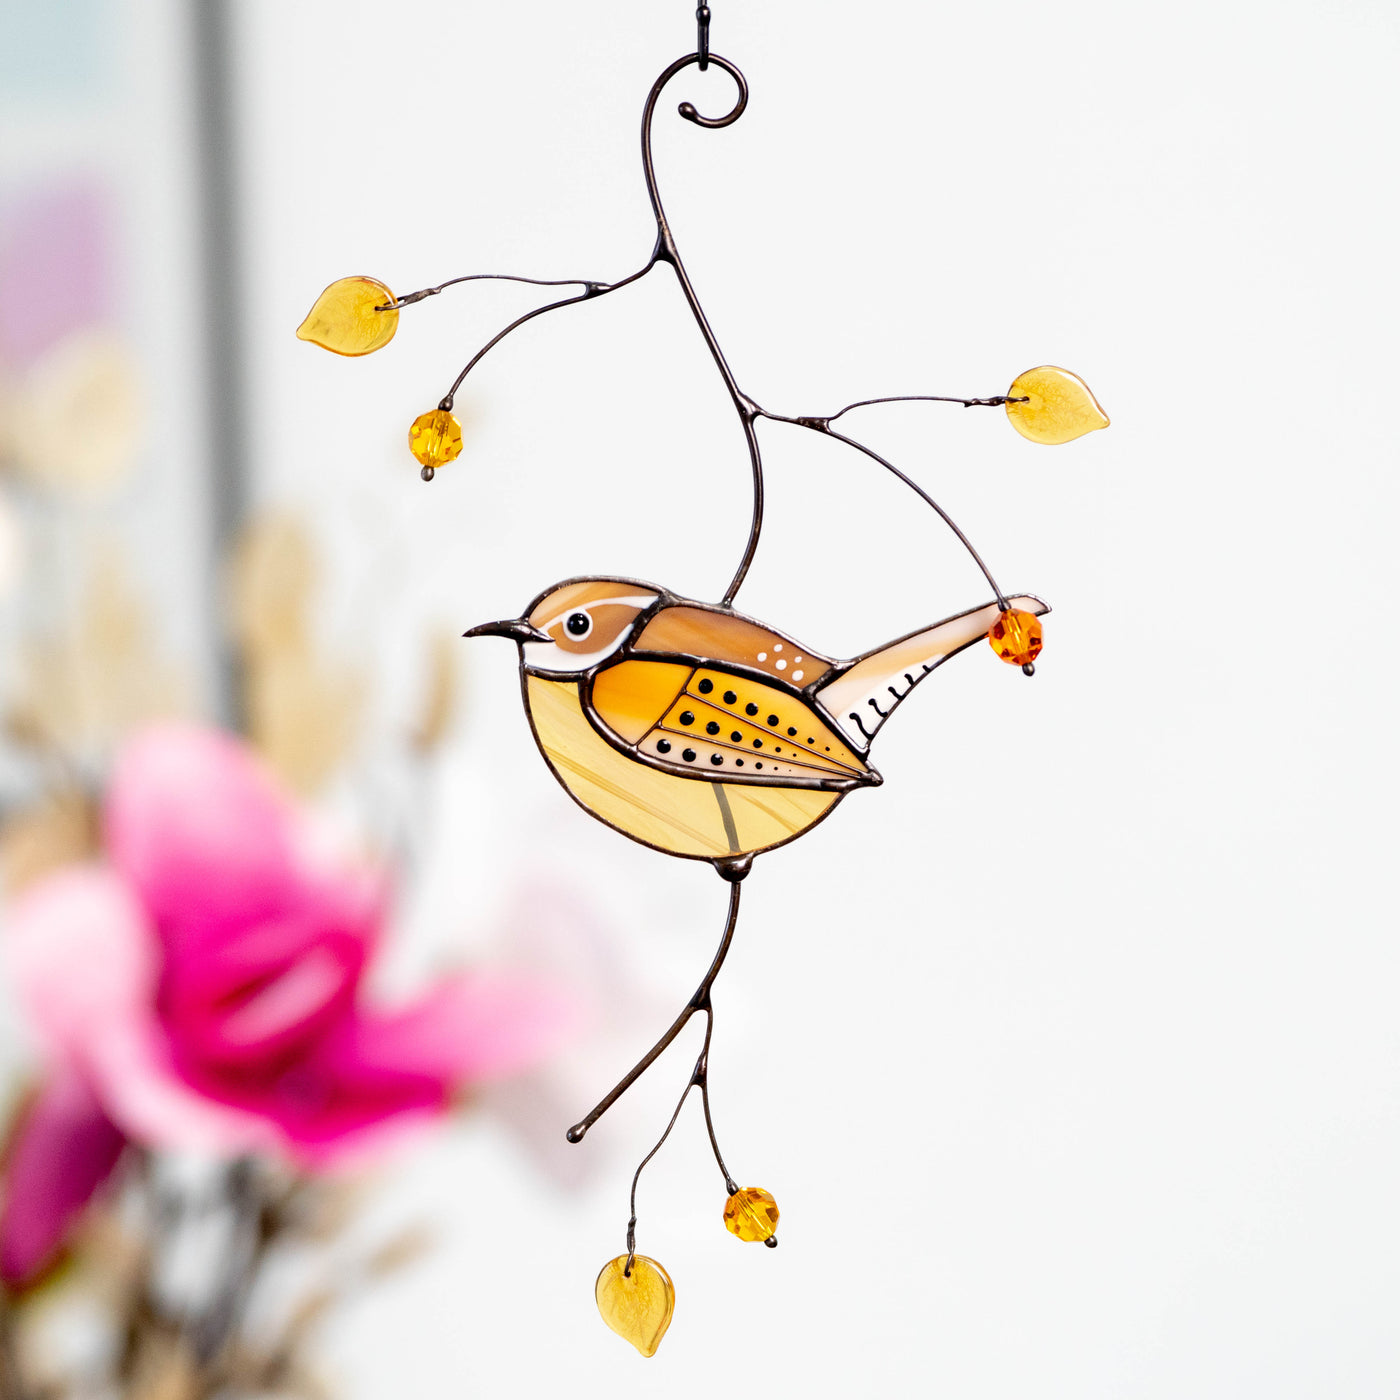 Stained glass suncatcher of Carolina wren on the branch with leaves and berries